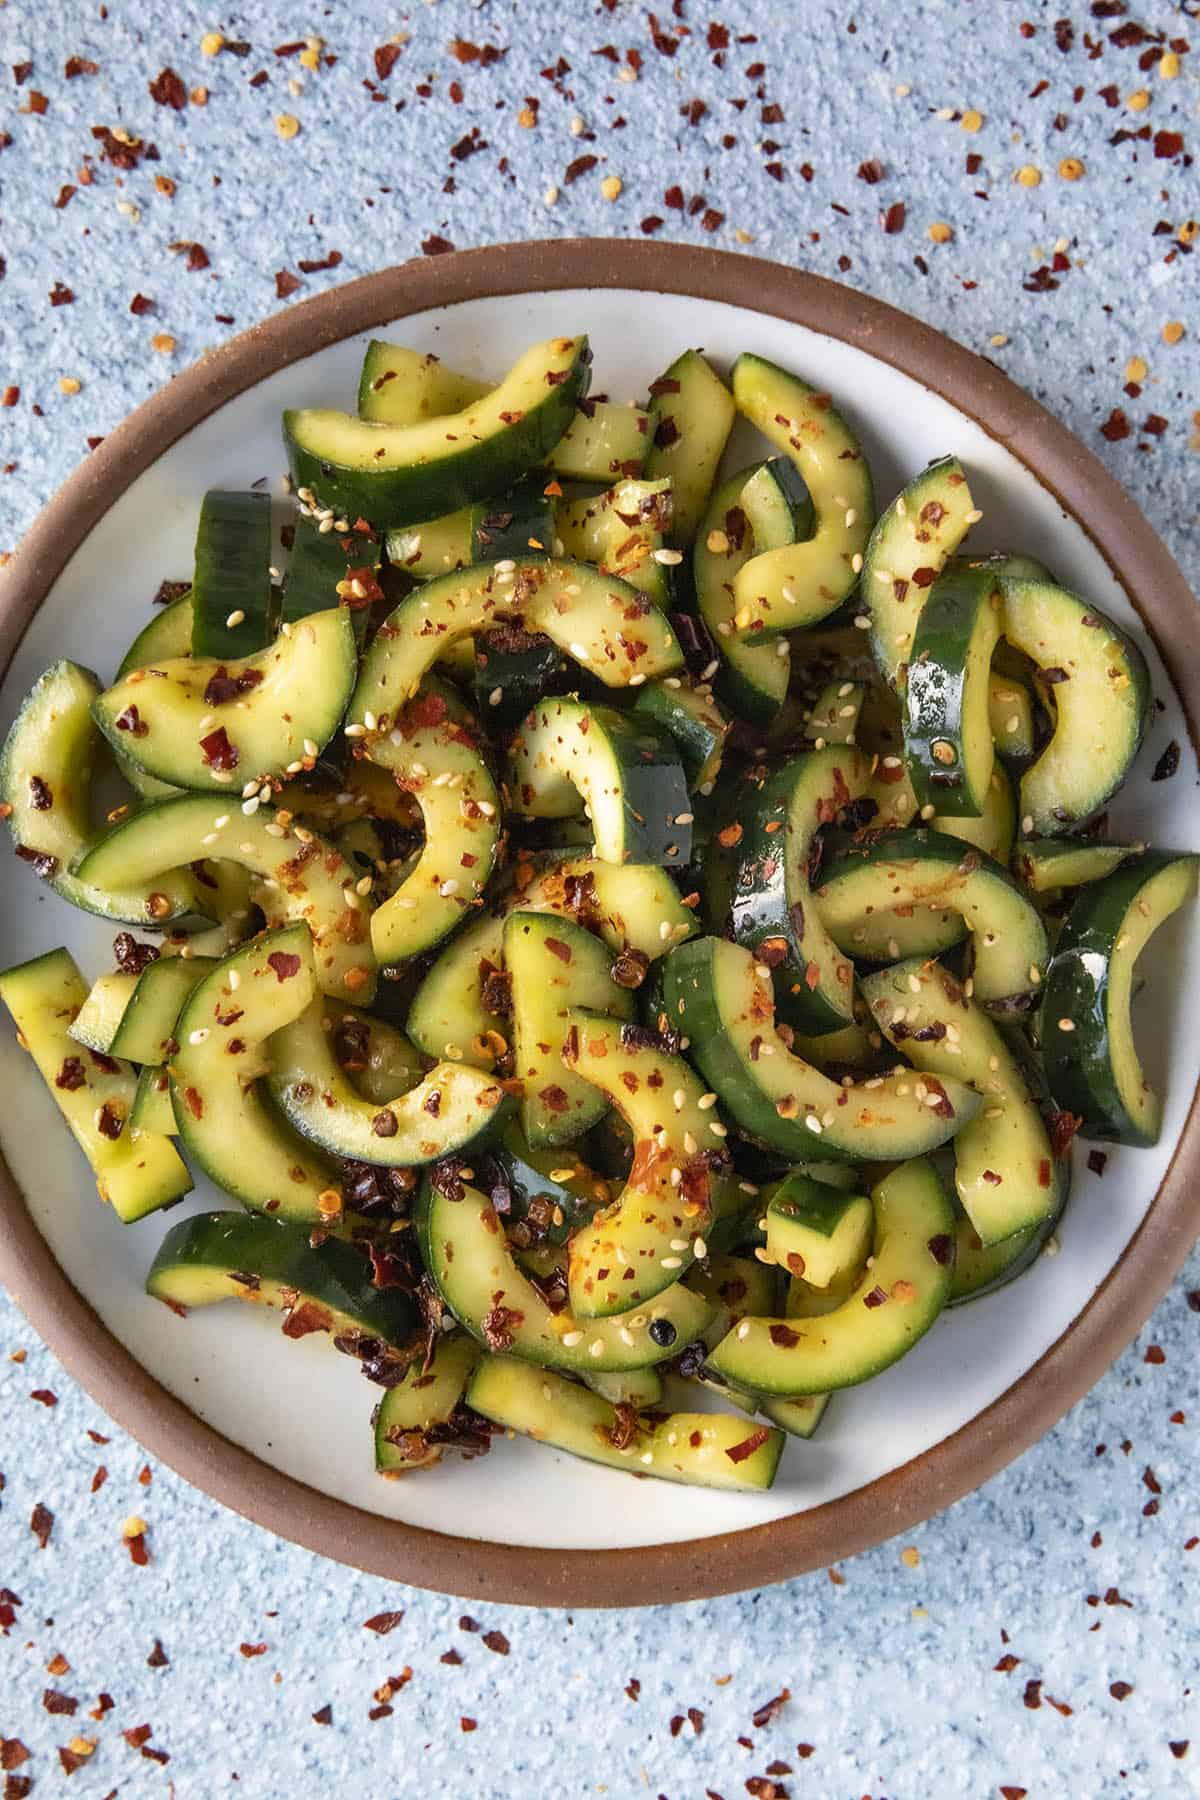 Sichuan Spiced Cucumber Salad on a plate with garnish